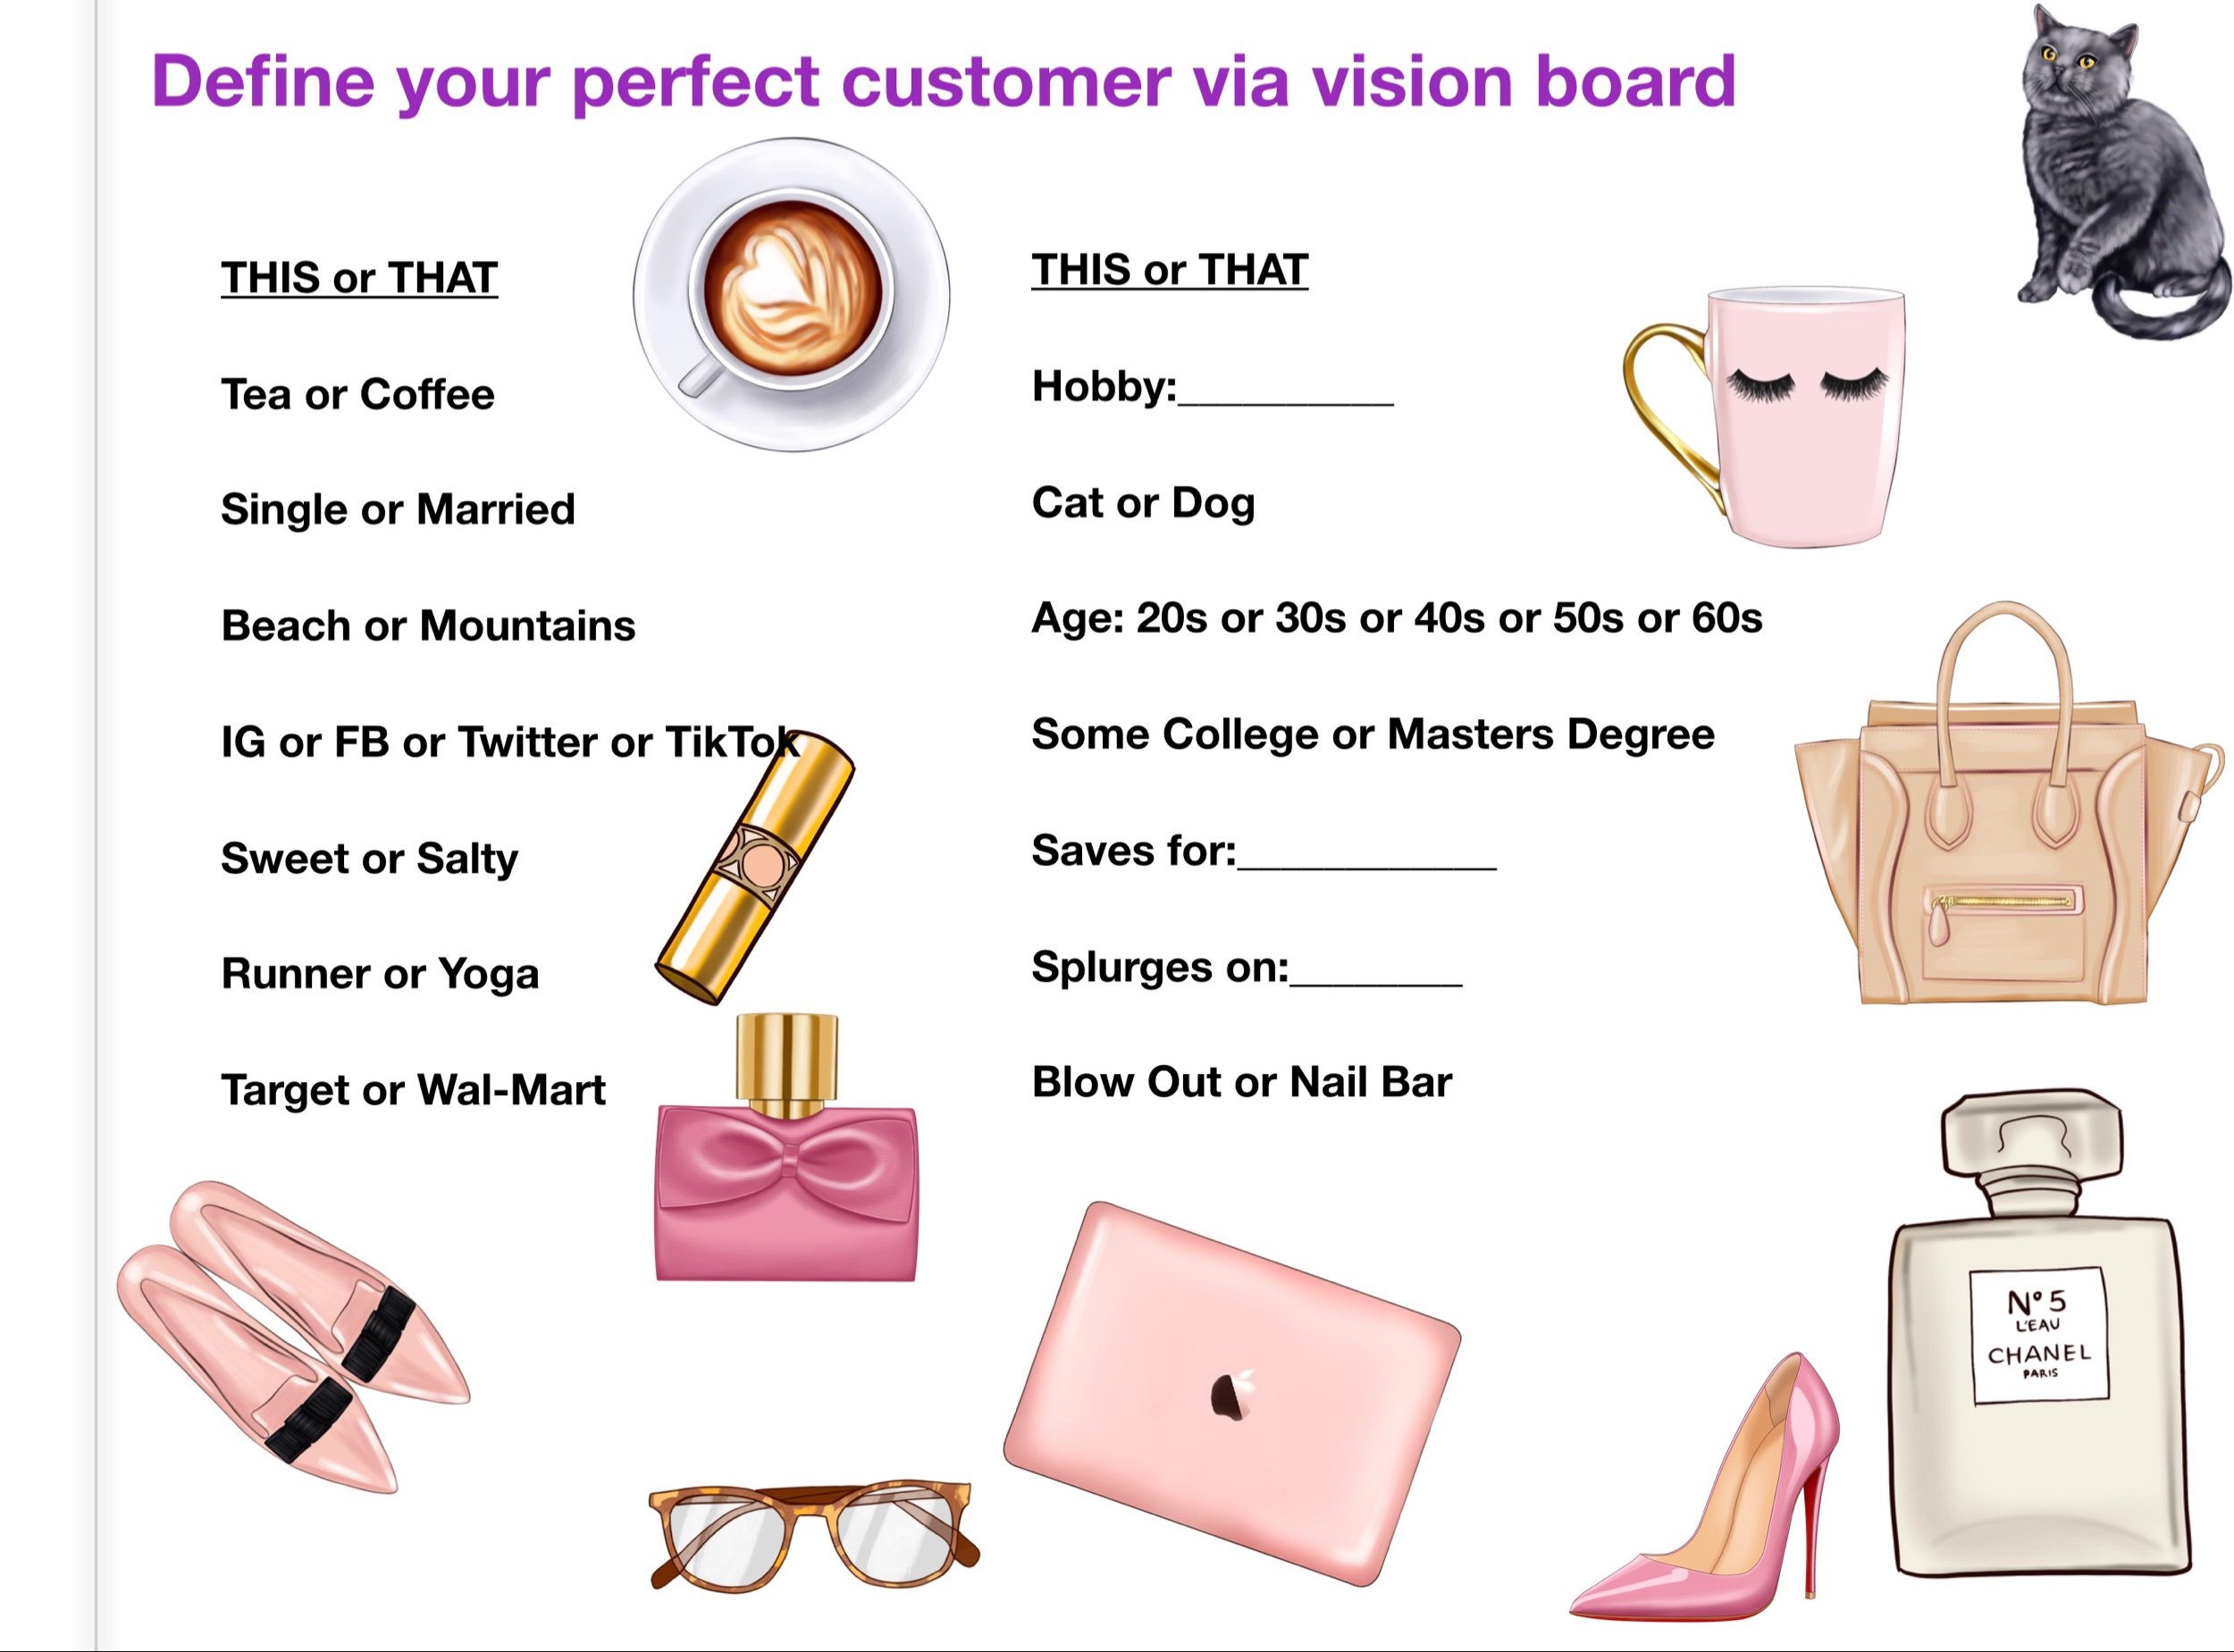 Vision board, determine your perfect customer